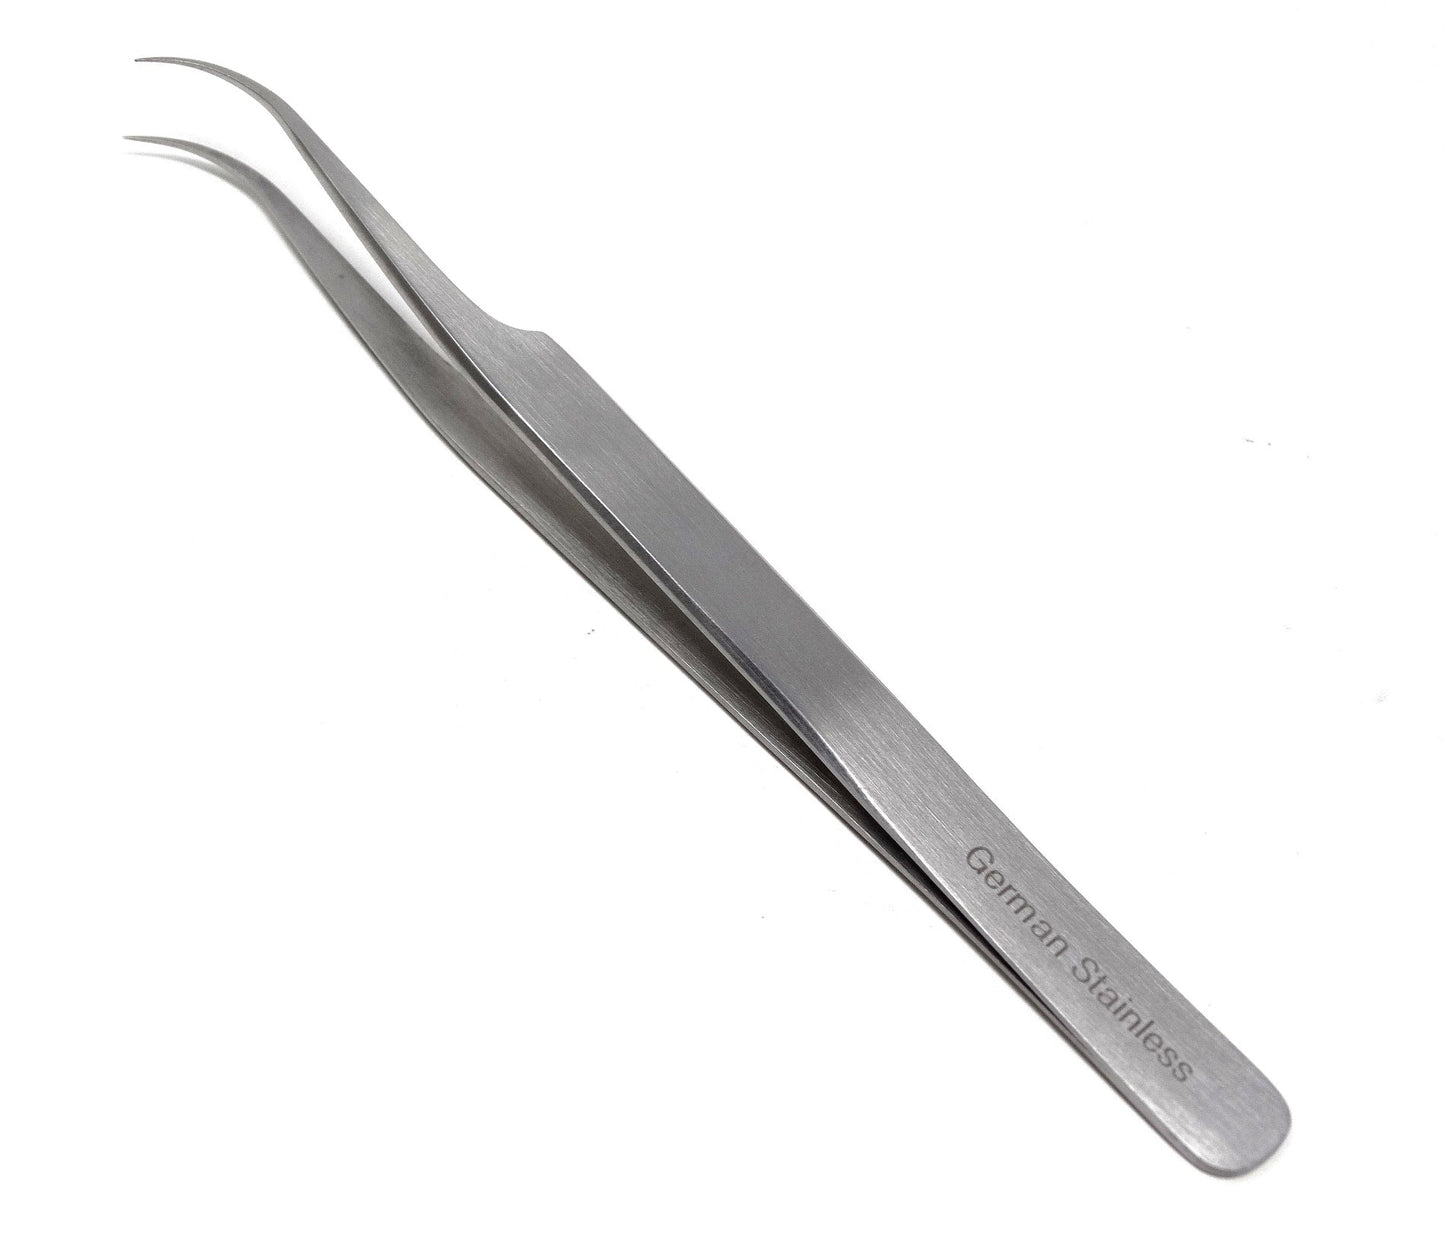 Foil Holding Dissecting Forceps 4.75" with Curved Smooth Jaws